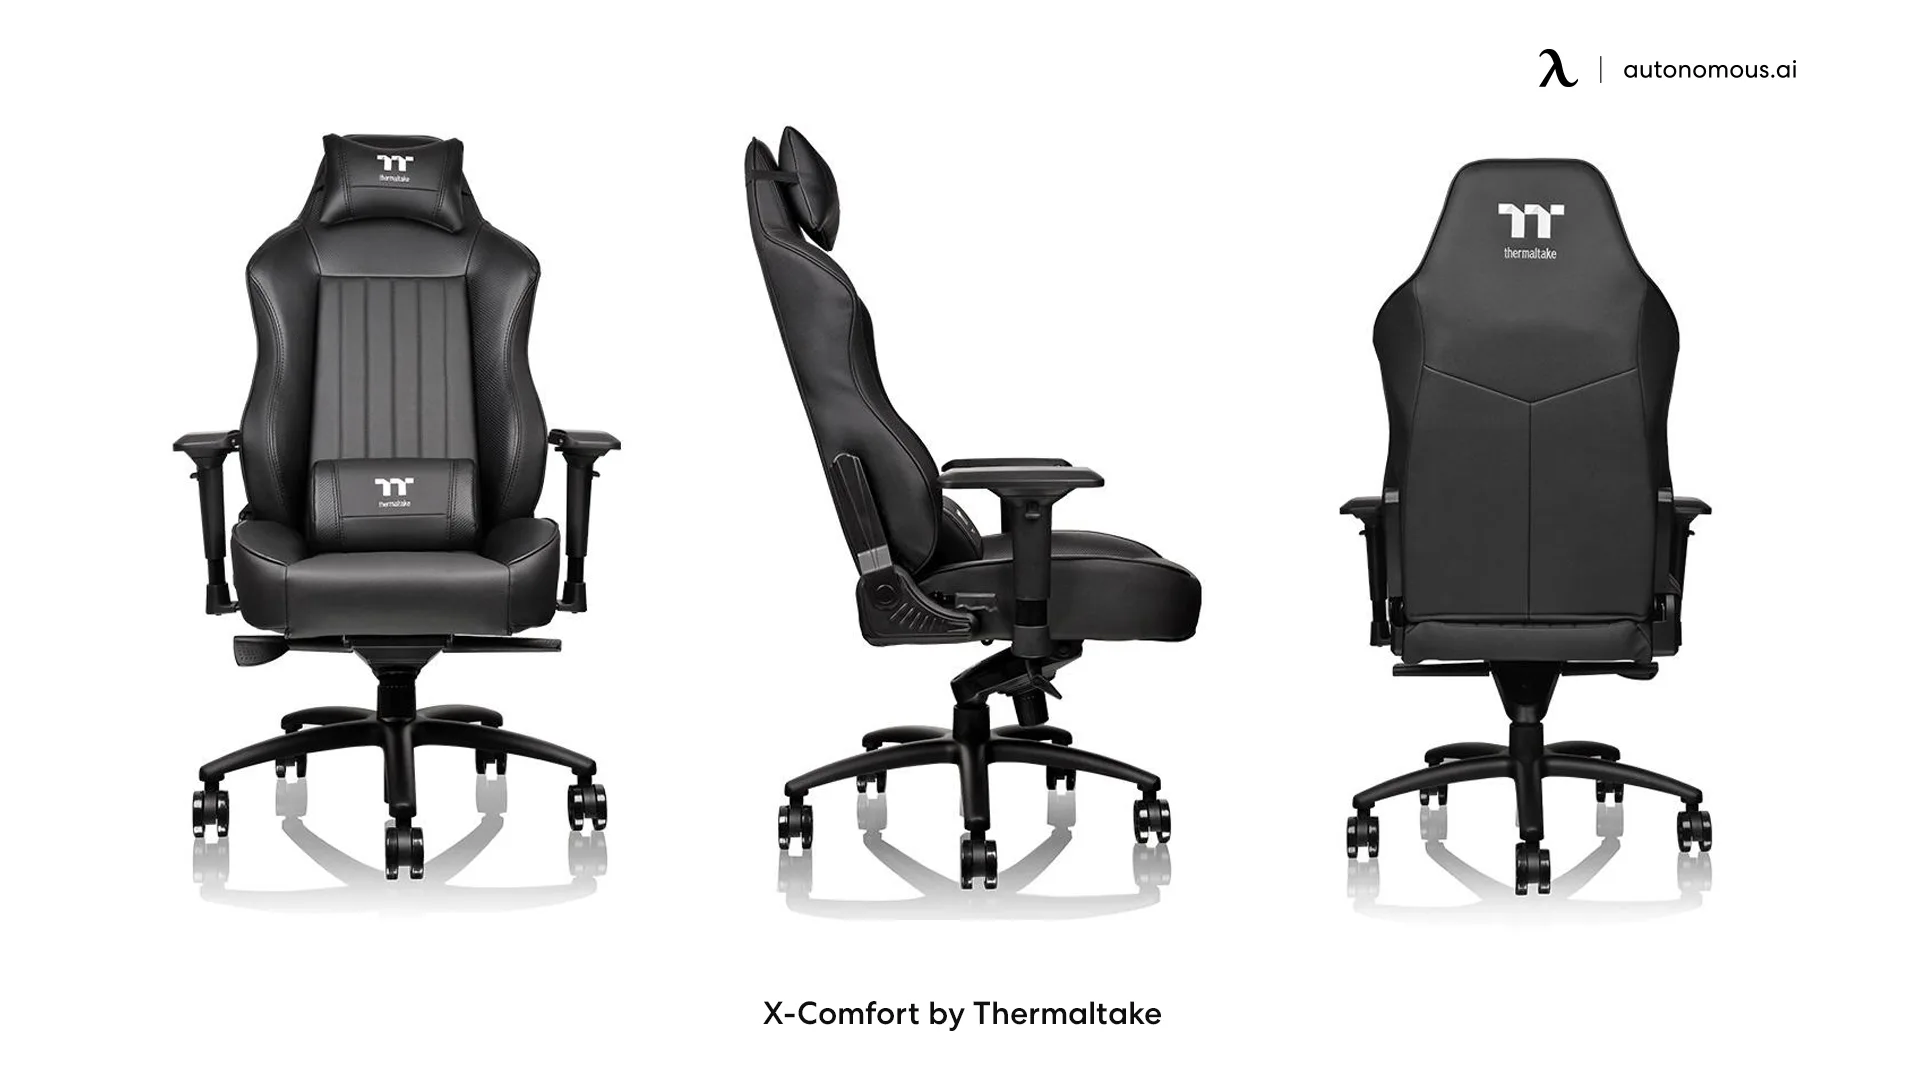 X-Comfort by Thermaltake